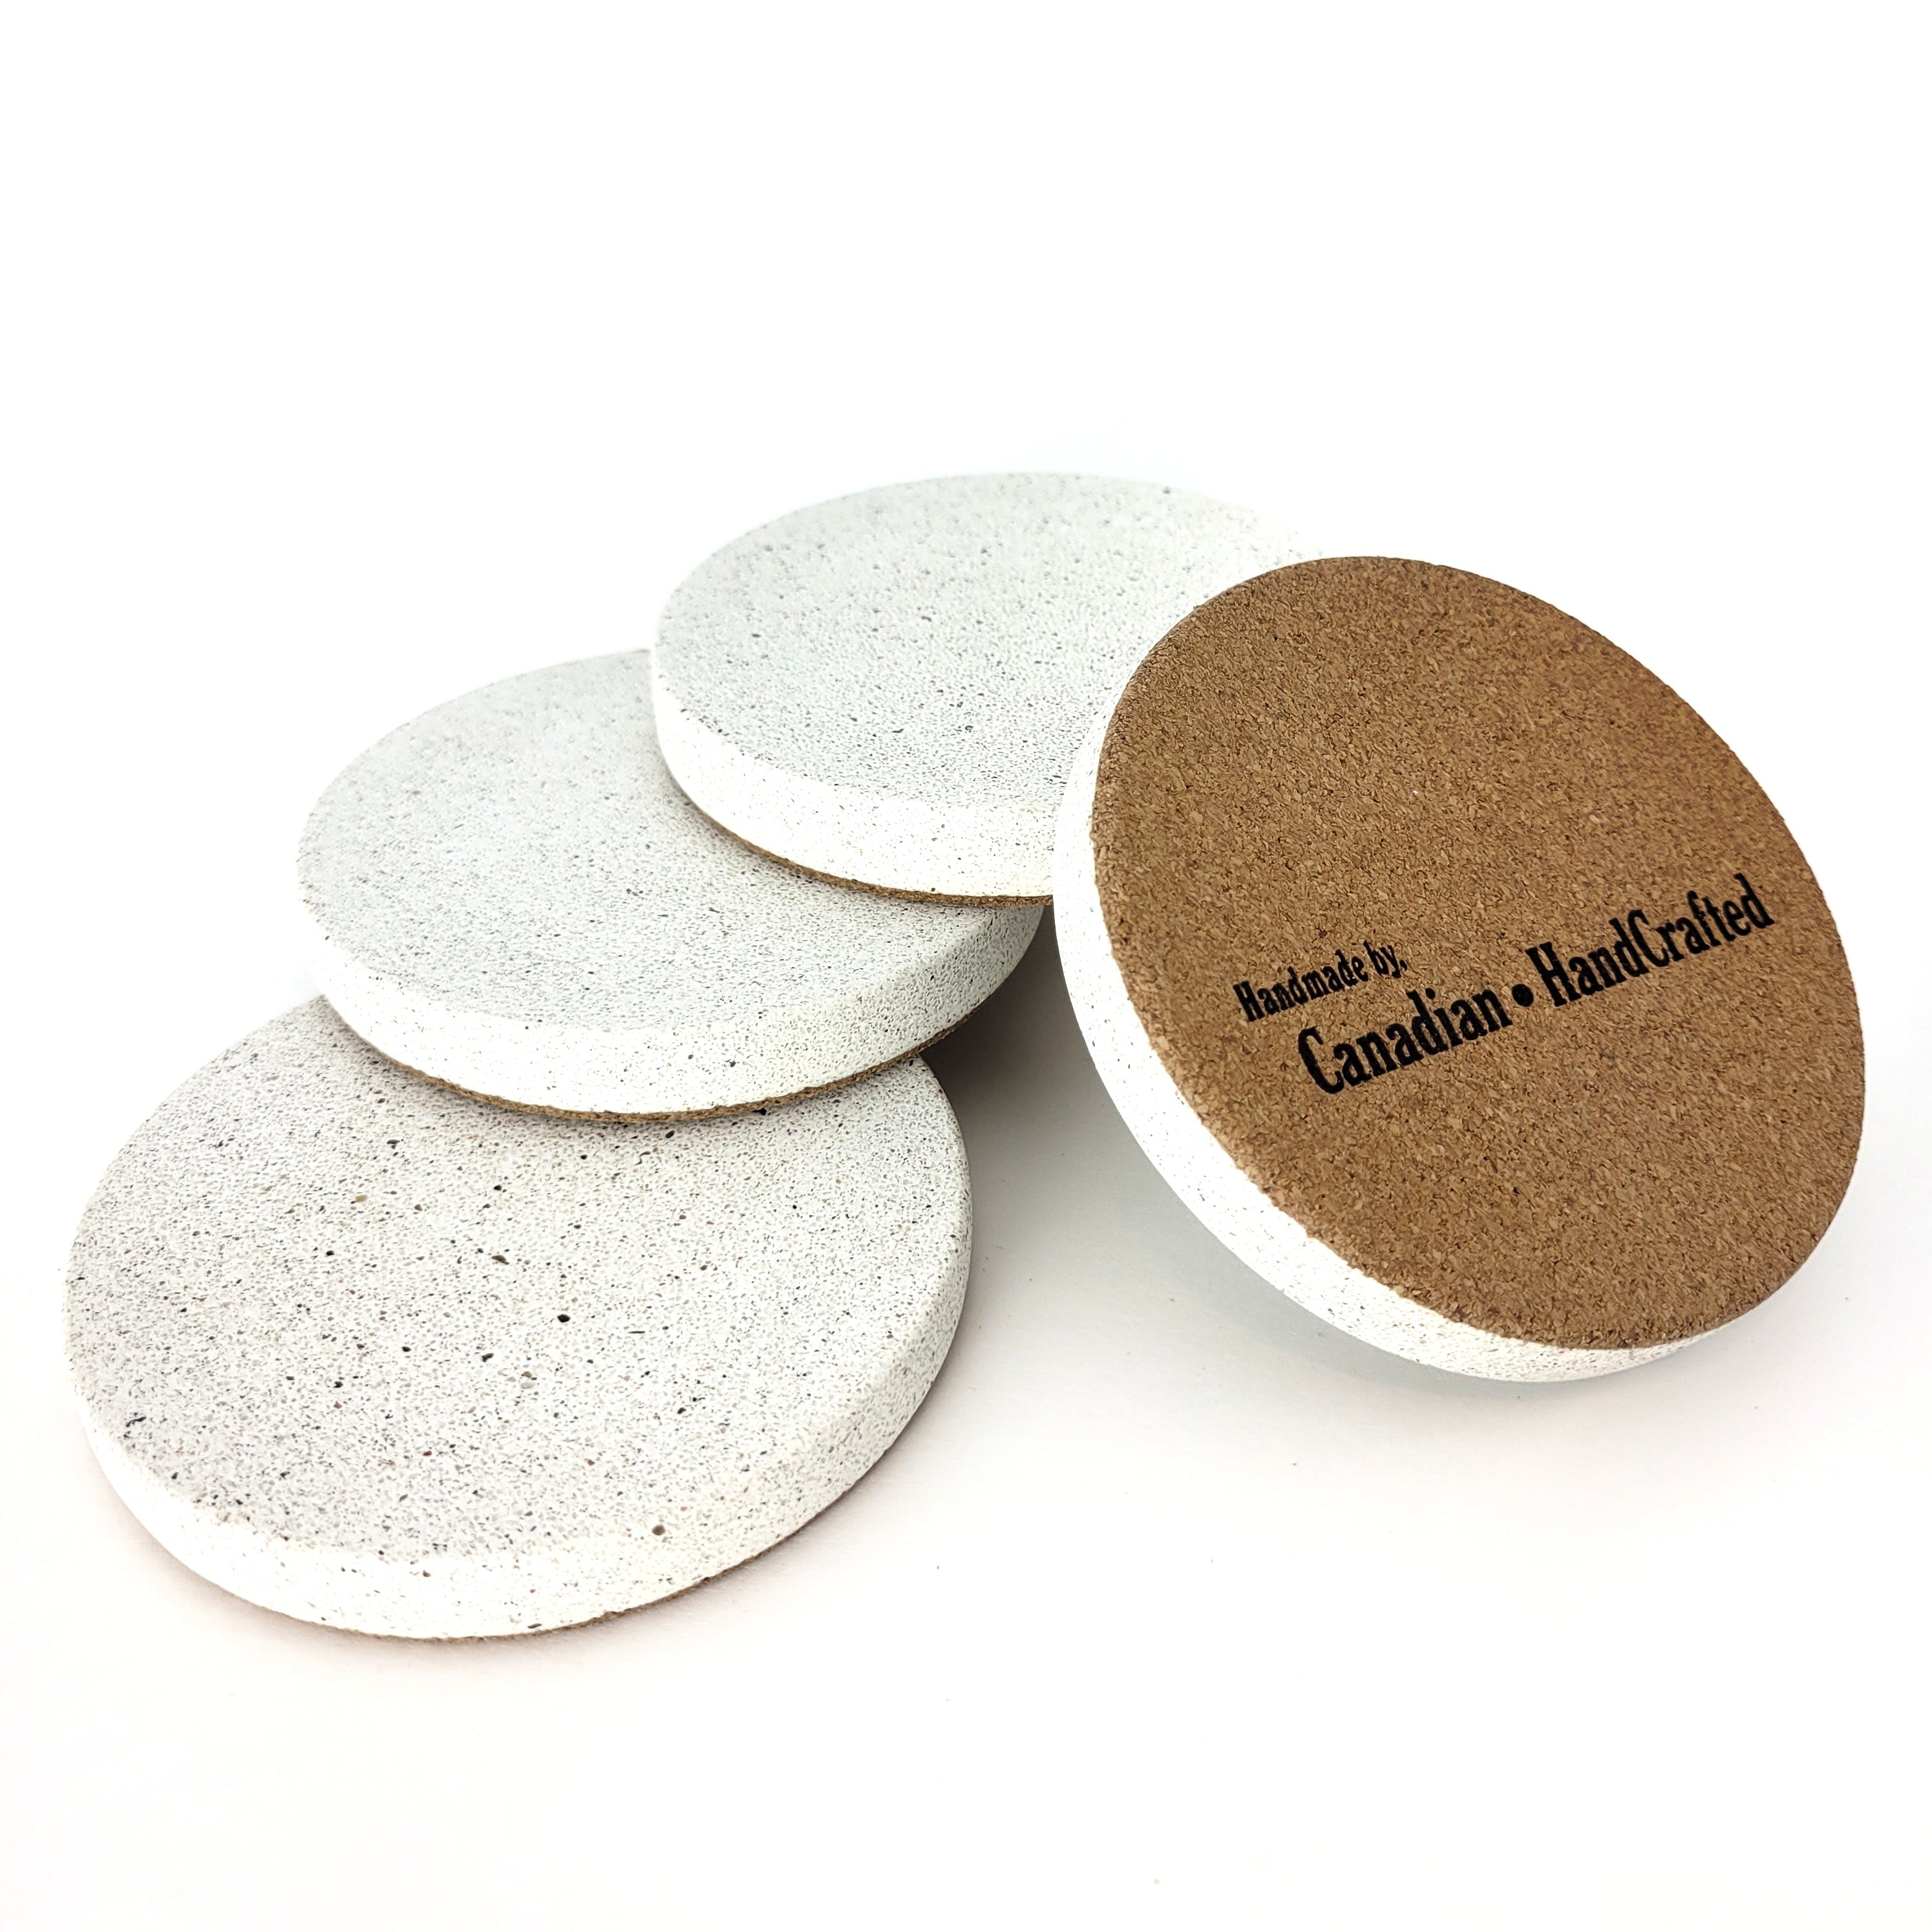 Set of 4 sparkling white sandstone coasters, one showcasing Canadian HandCrafted handmade engraving on the bottom, elegant and durable design